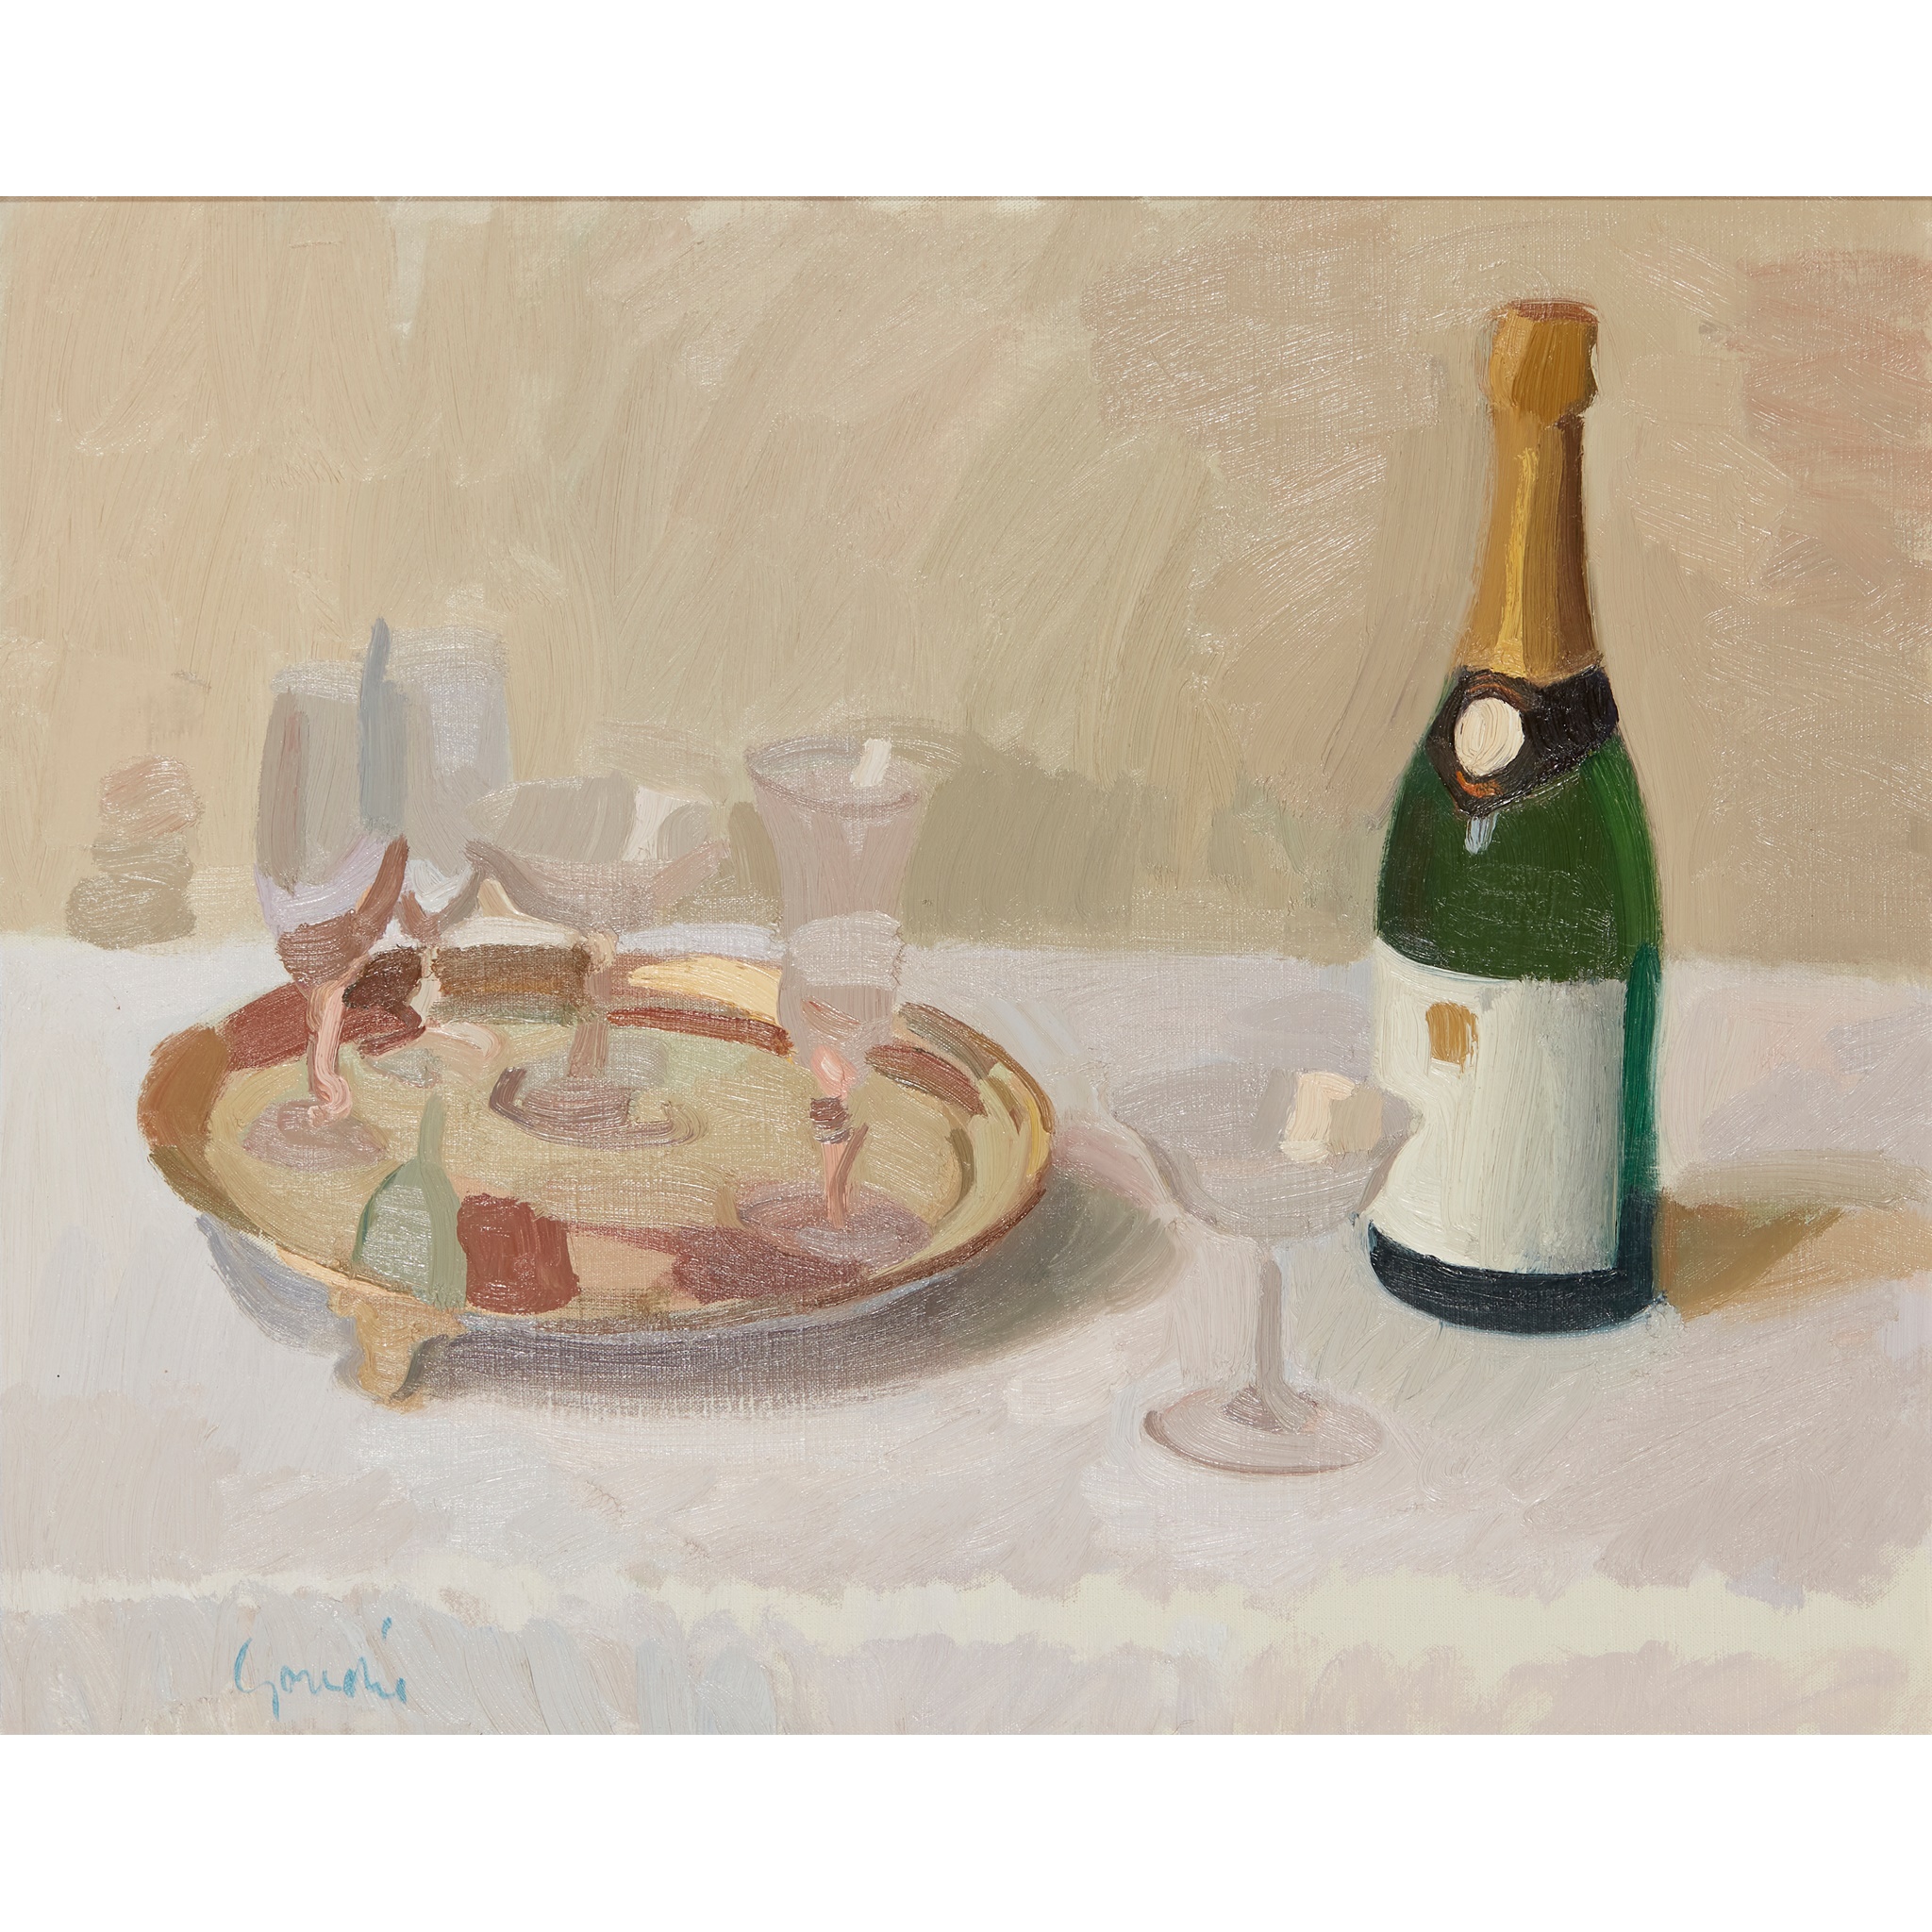 § ALEXANDER GOUDIE (SCOTTISH 1933-2004) STILL LIFE WITH CHAMPAGNE BOTTLE AND GLASSES